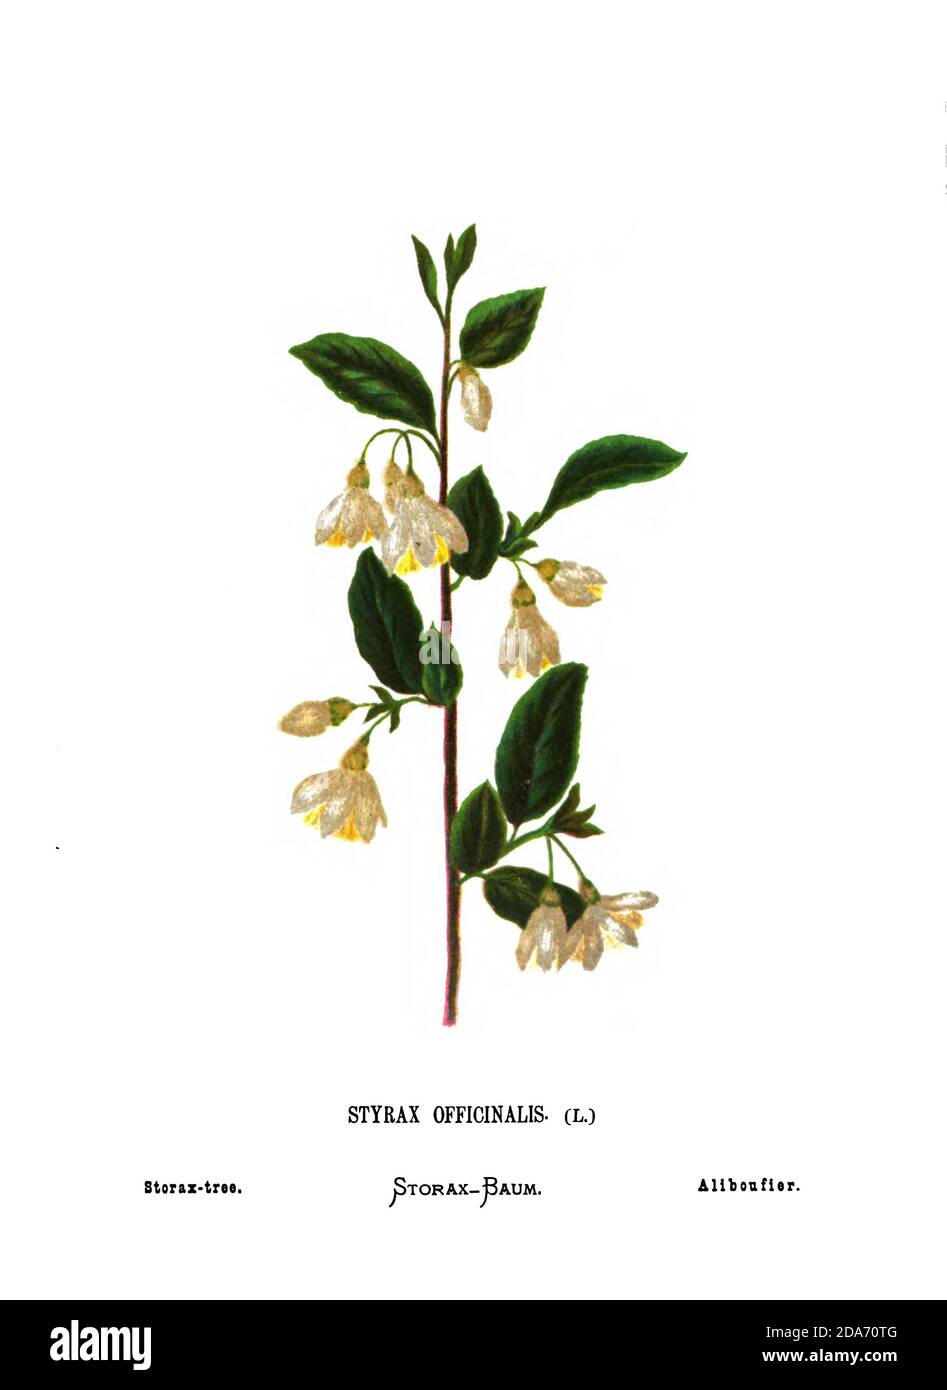 Storax tree (Styrax officinalis) a species of shrub in the family Styracaceae. From the book Wild flowers of the Holy Land: Fifty-Four Plates Printed In Colours, Drawn And Painted After Nature. by Mrs. Hannah Zeller, (Gobat); Tristram, H. B. (Henry Baker), and Edward Atkinson, Published in London by James Nisbet & Co 1876 on white background Stock Photo